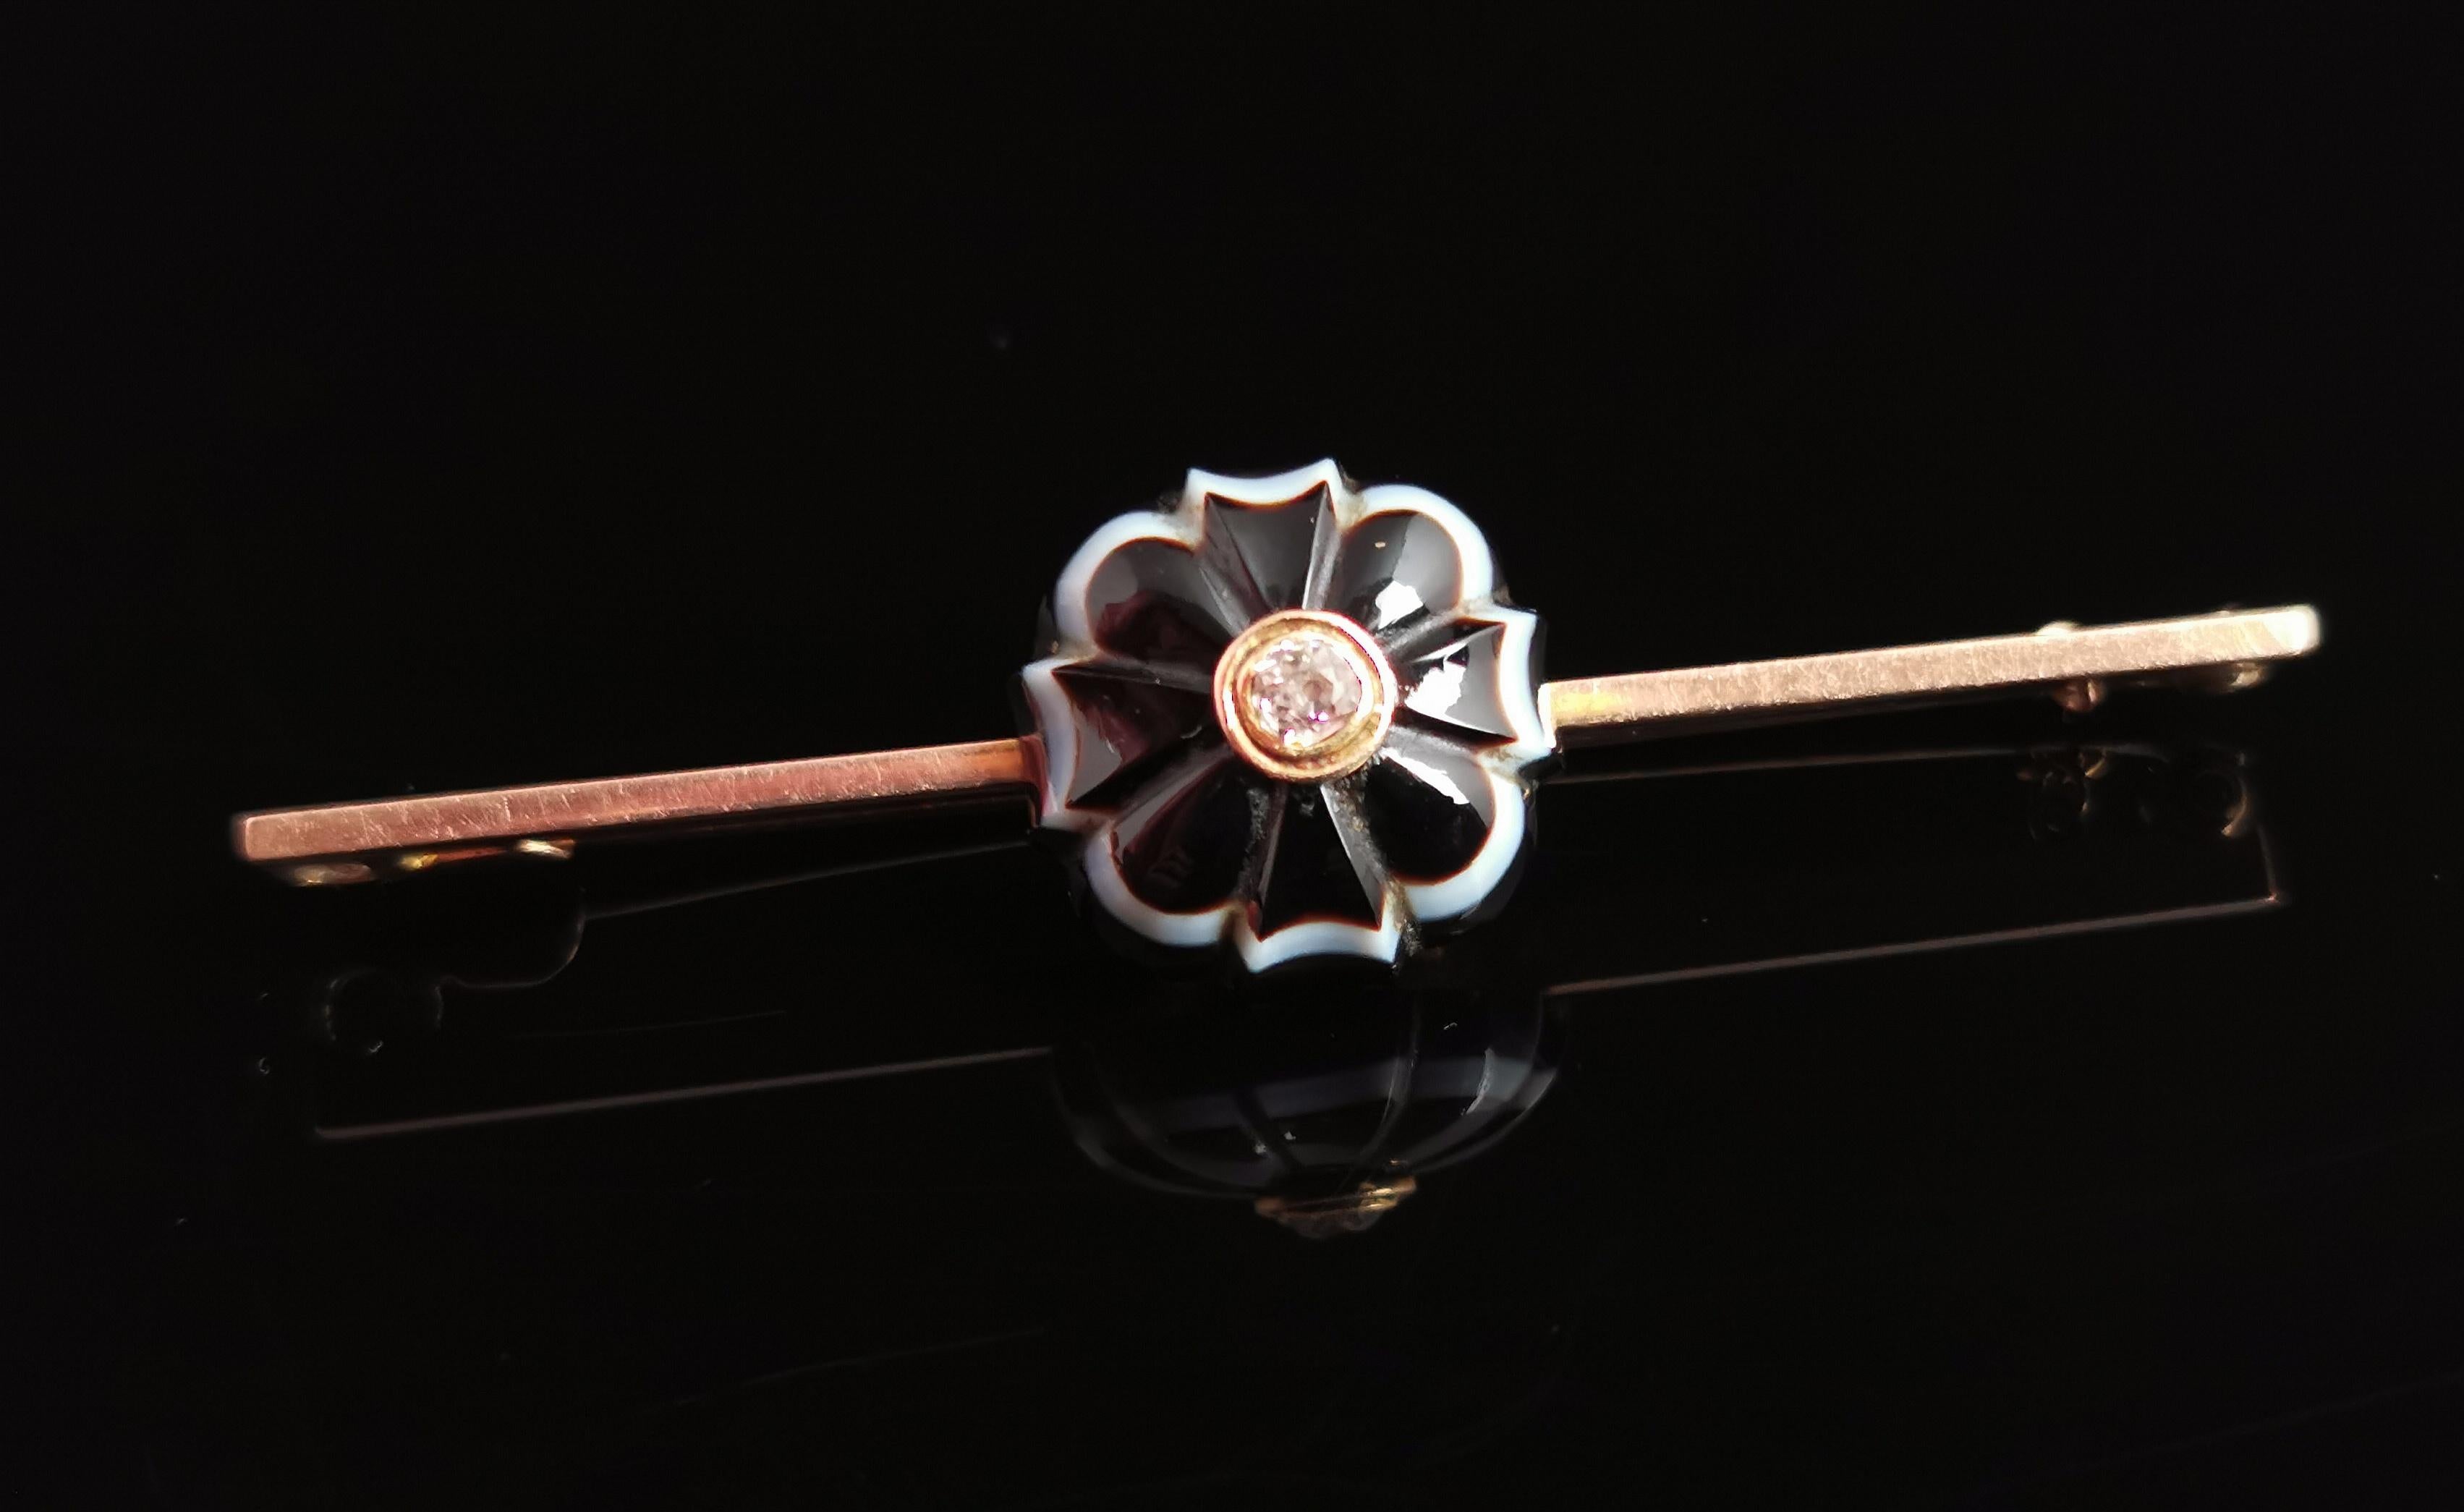 A beautiful antique Diamond and banded agate mourning brooch.

This is a tremendously beautiful piece, an antique gold bar brooch with a very well carved banded agate flower.

The forget me not flower has beautiful rich tones, mostly in black with